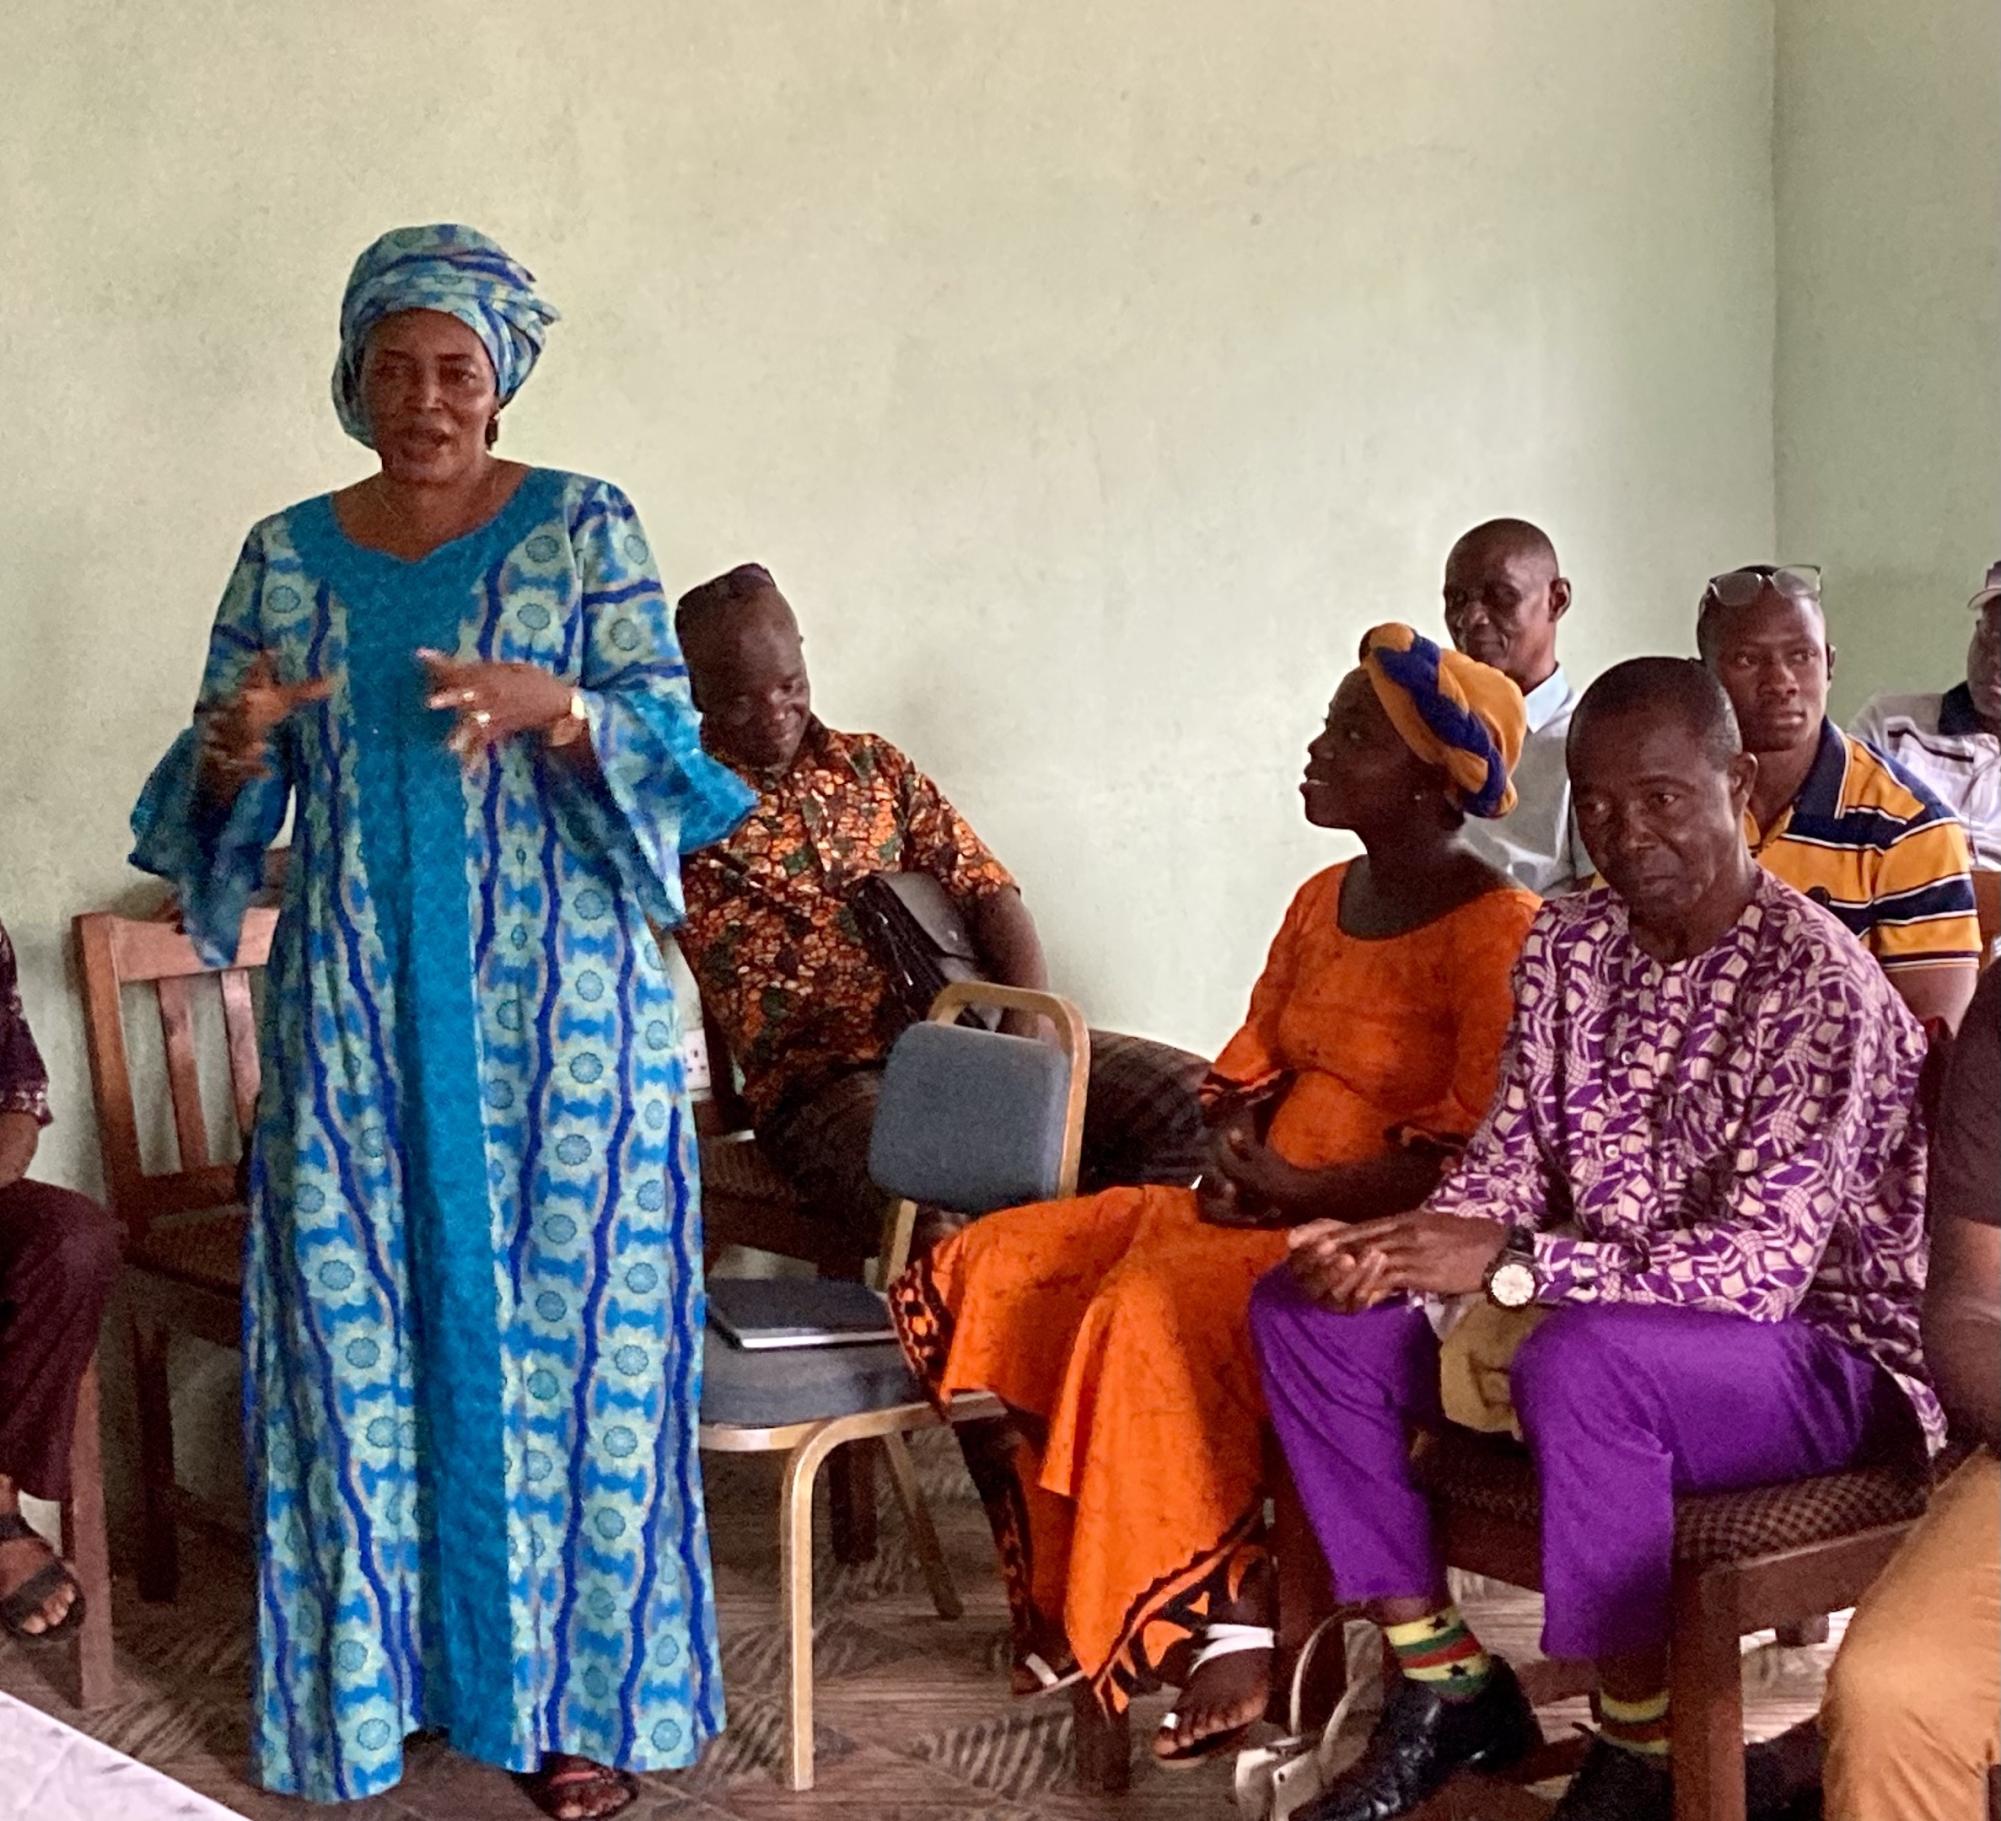 A woman speaks at a meeting regarding womens rights in Sierra Leone (Courtesy of Lucy Ellis).